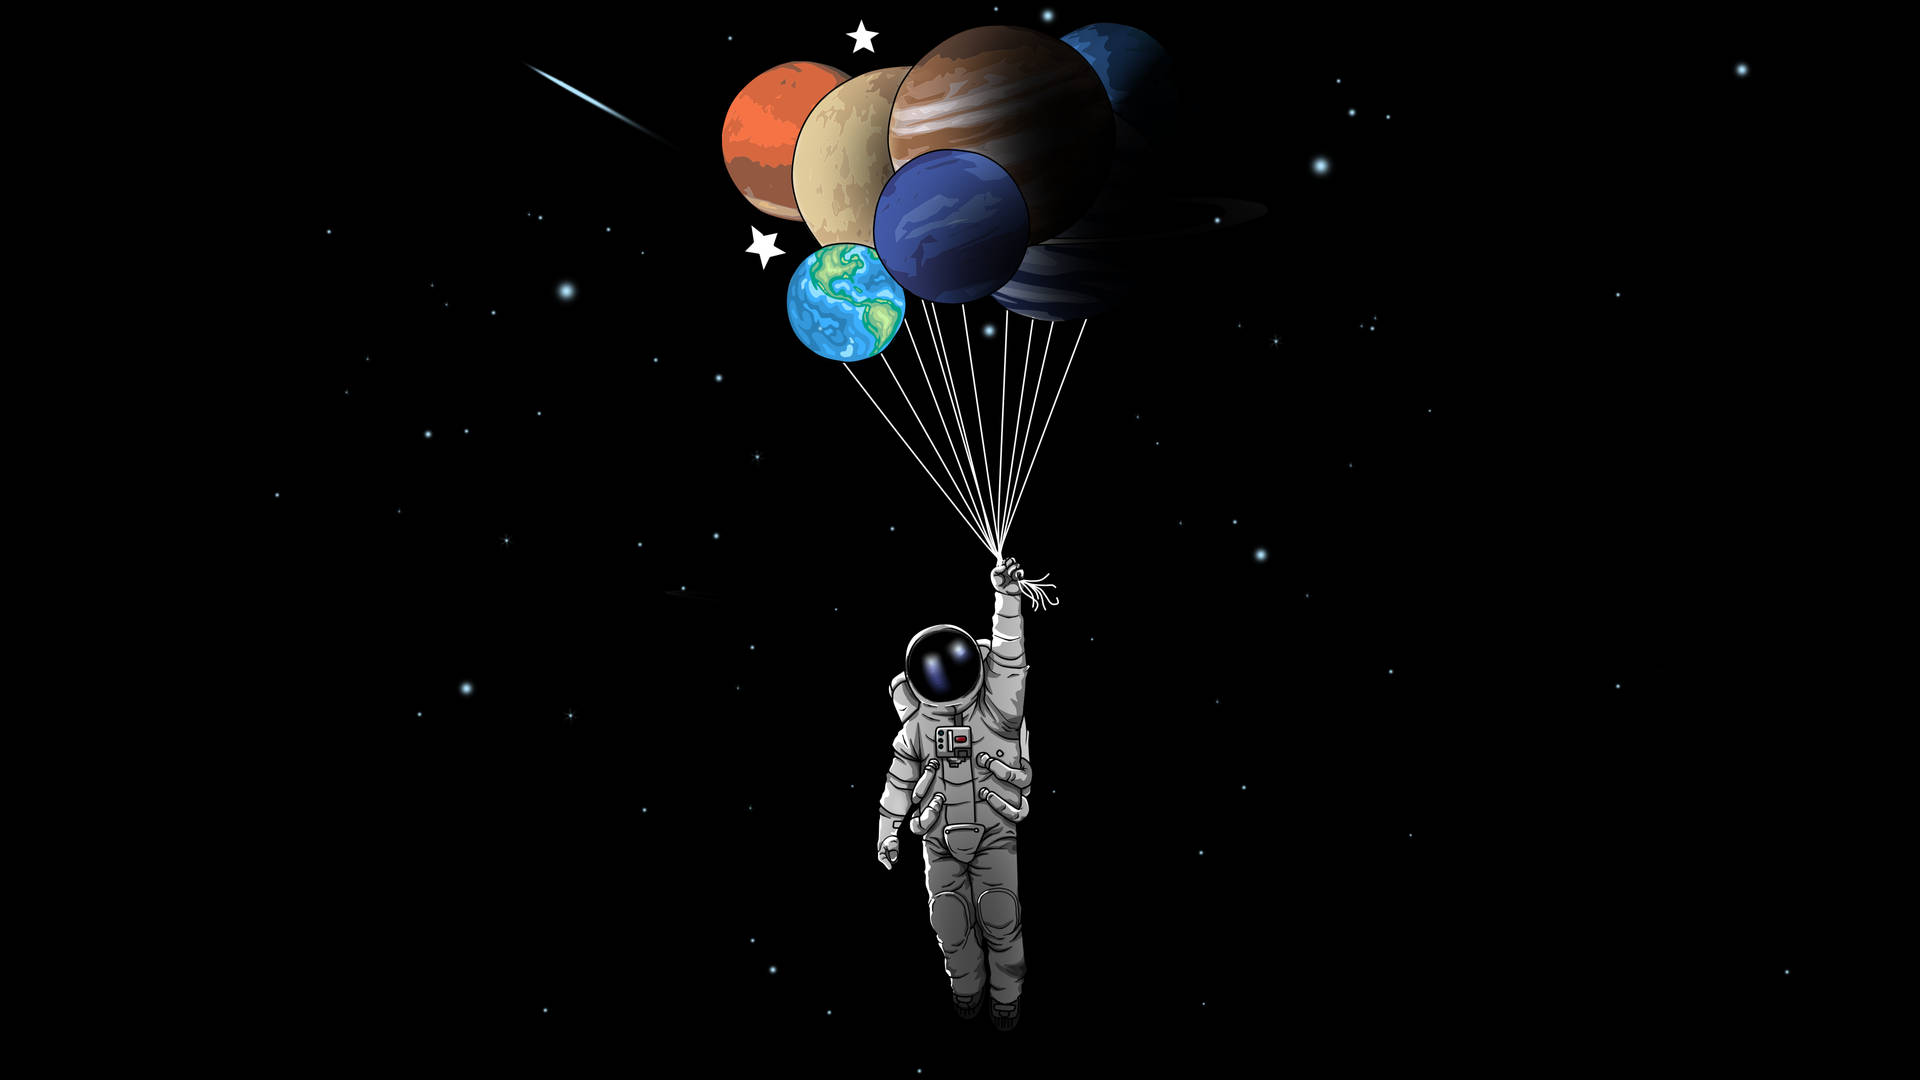 4k Astronaut With Planet Balloons Background